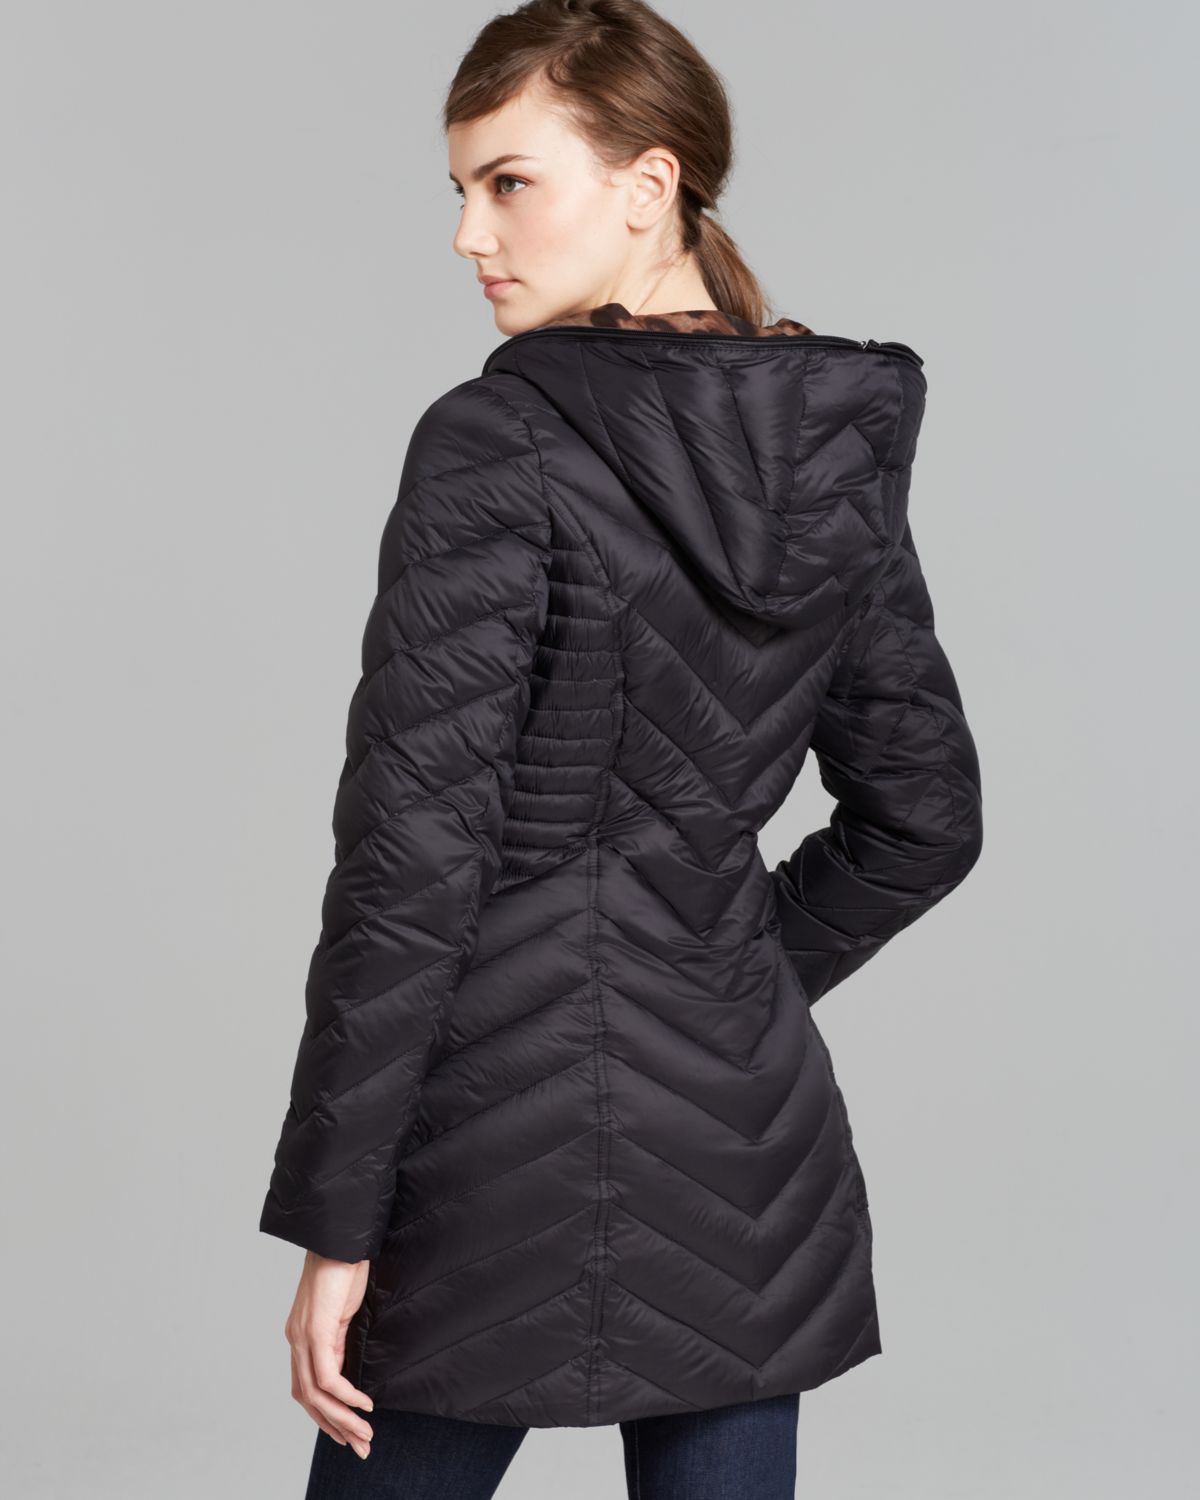 Laundry by shelli segal Packable Lightweight Down Jacket in Black | Lyst